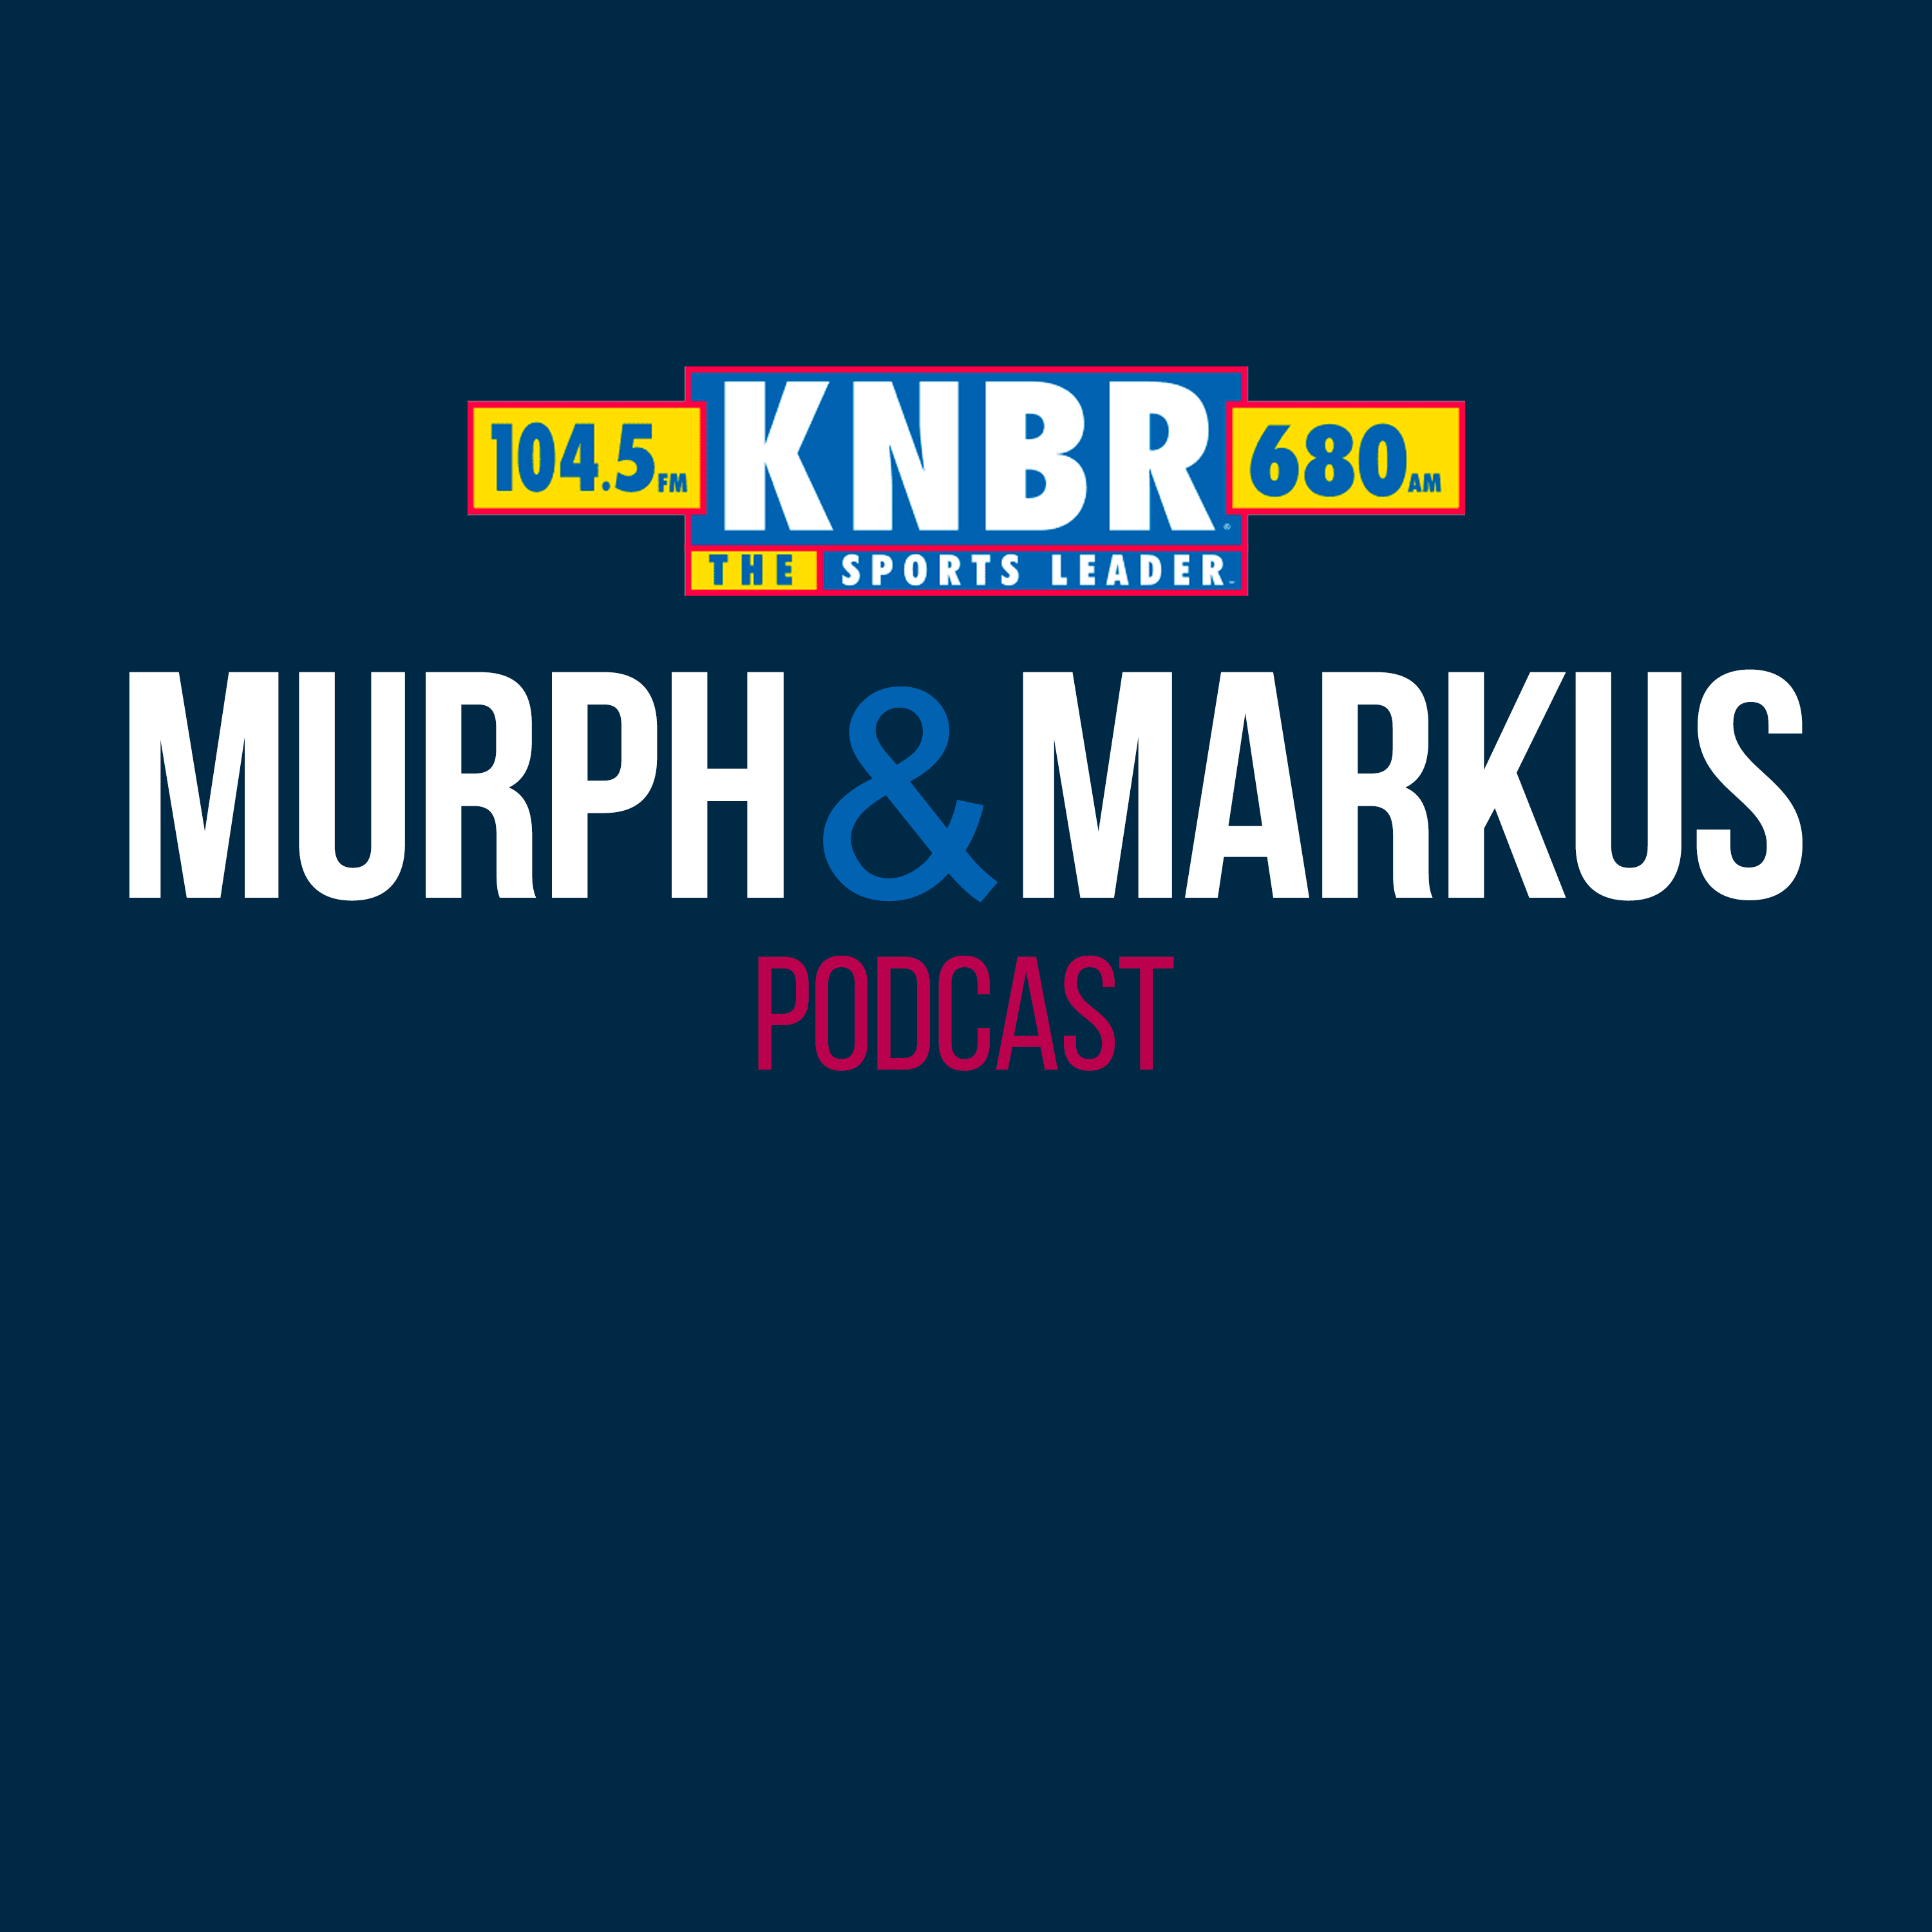 12-4 Tim Ryan joins Murph and Markus to break down the 49ers dominant win over the Eagles